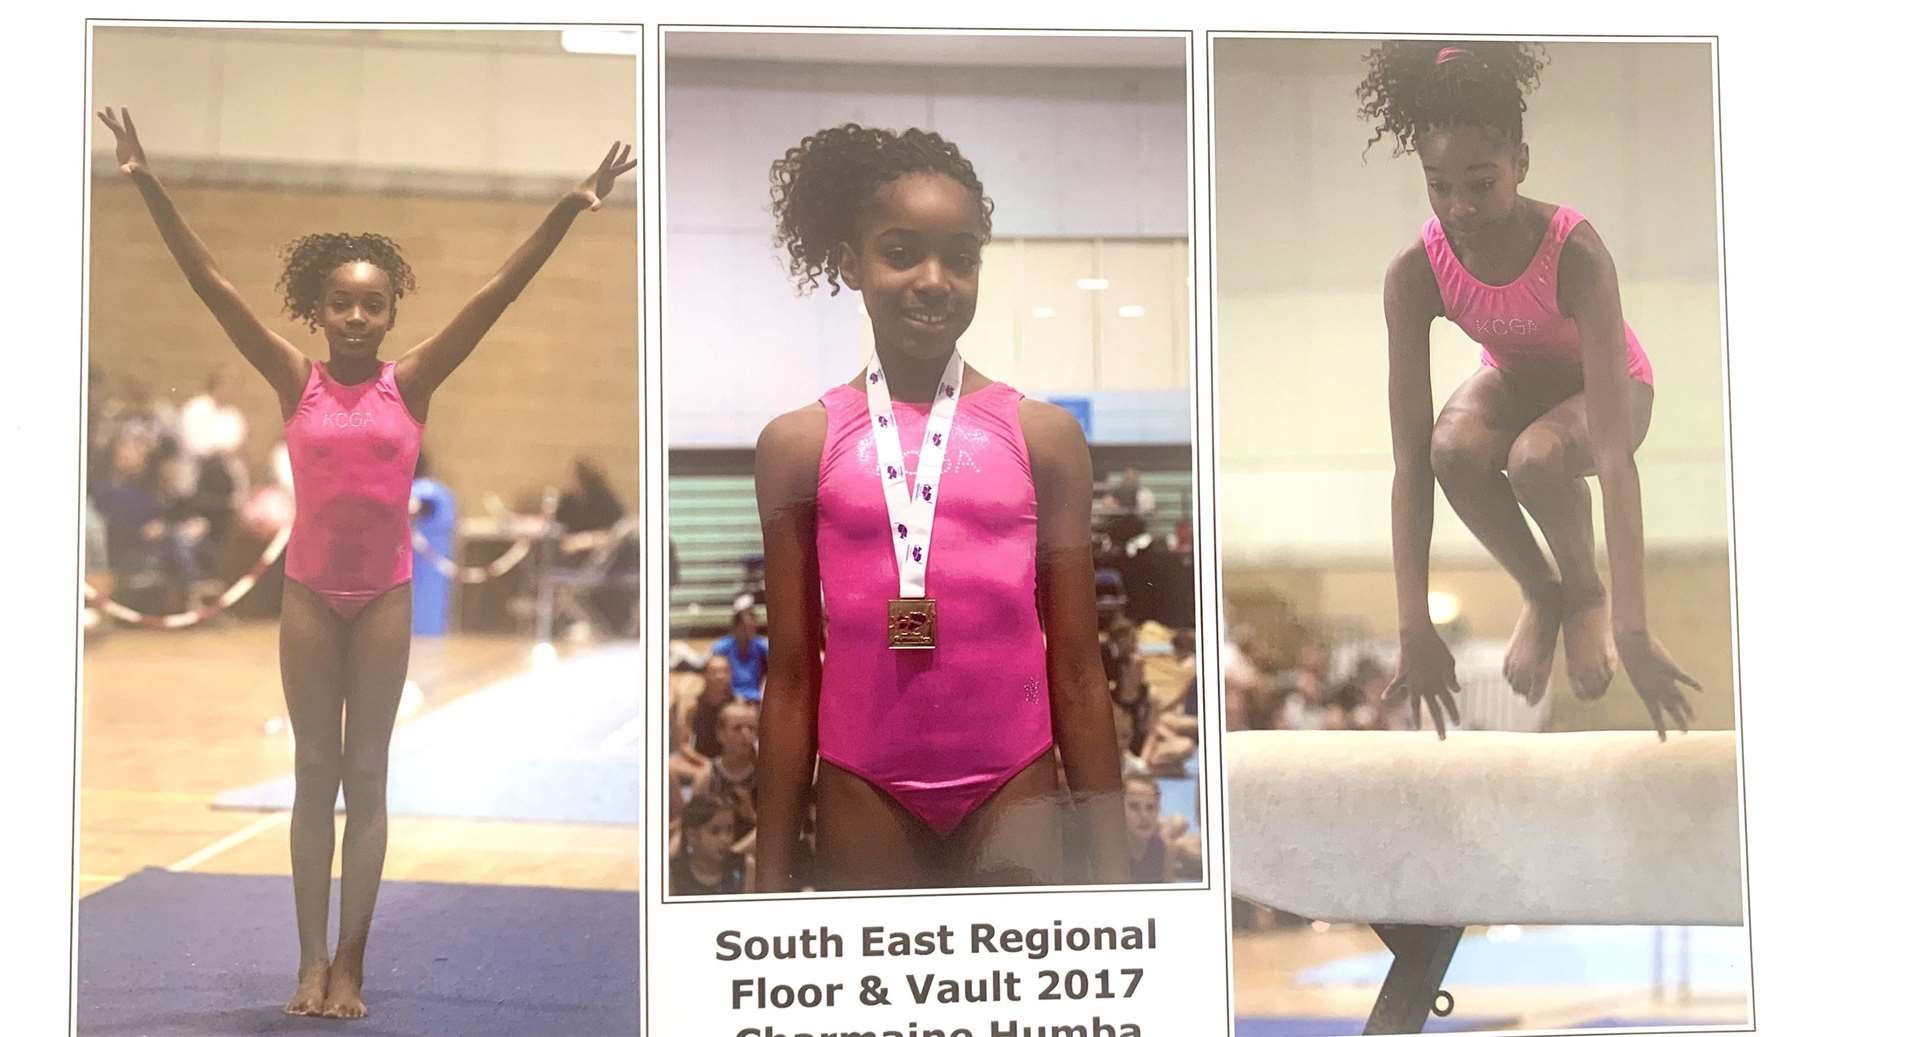 Charmaine Humba at a regional gymnastic competition in 2017